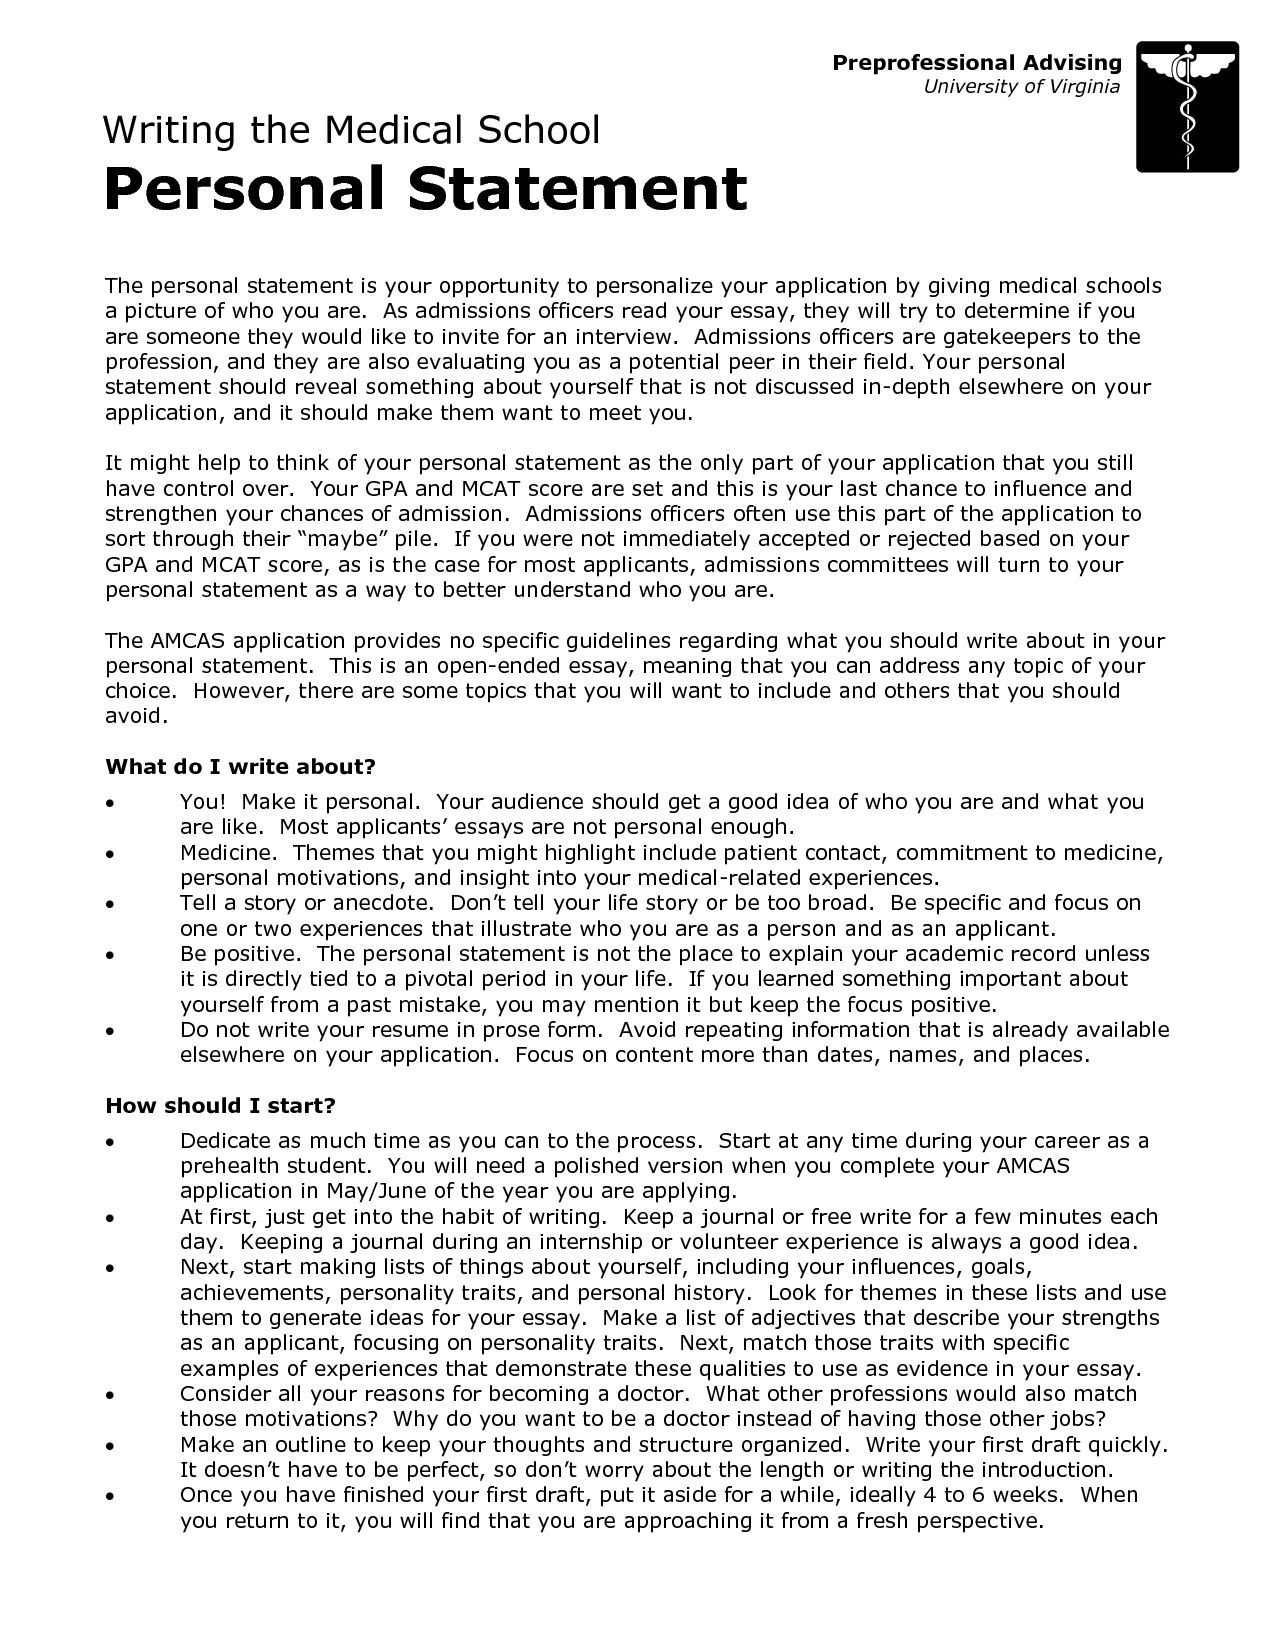 personal statement for university admission - blogger.com